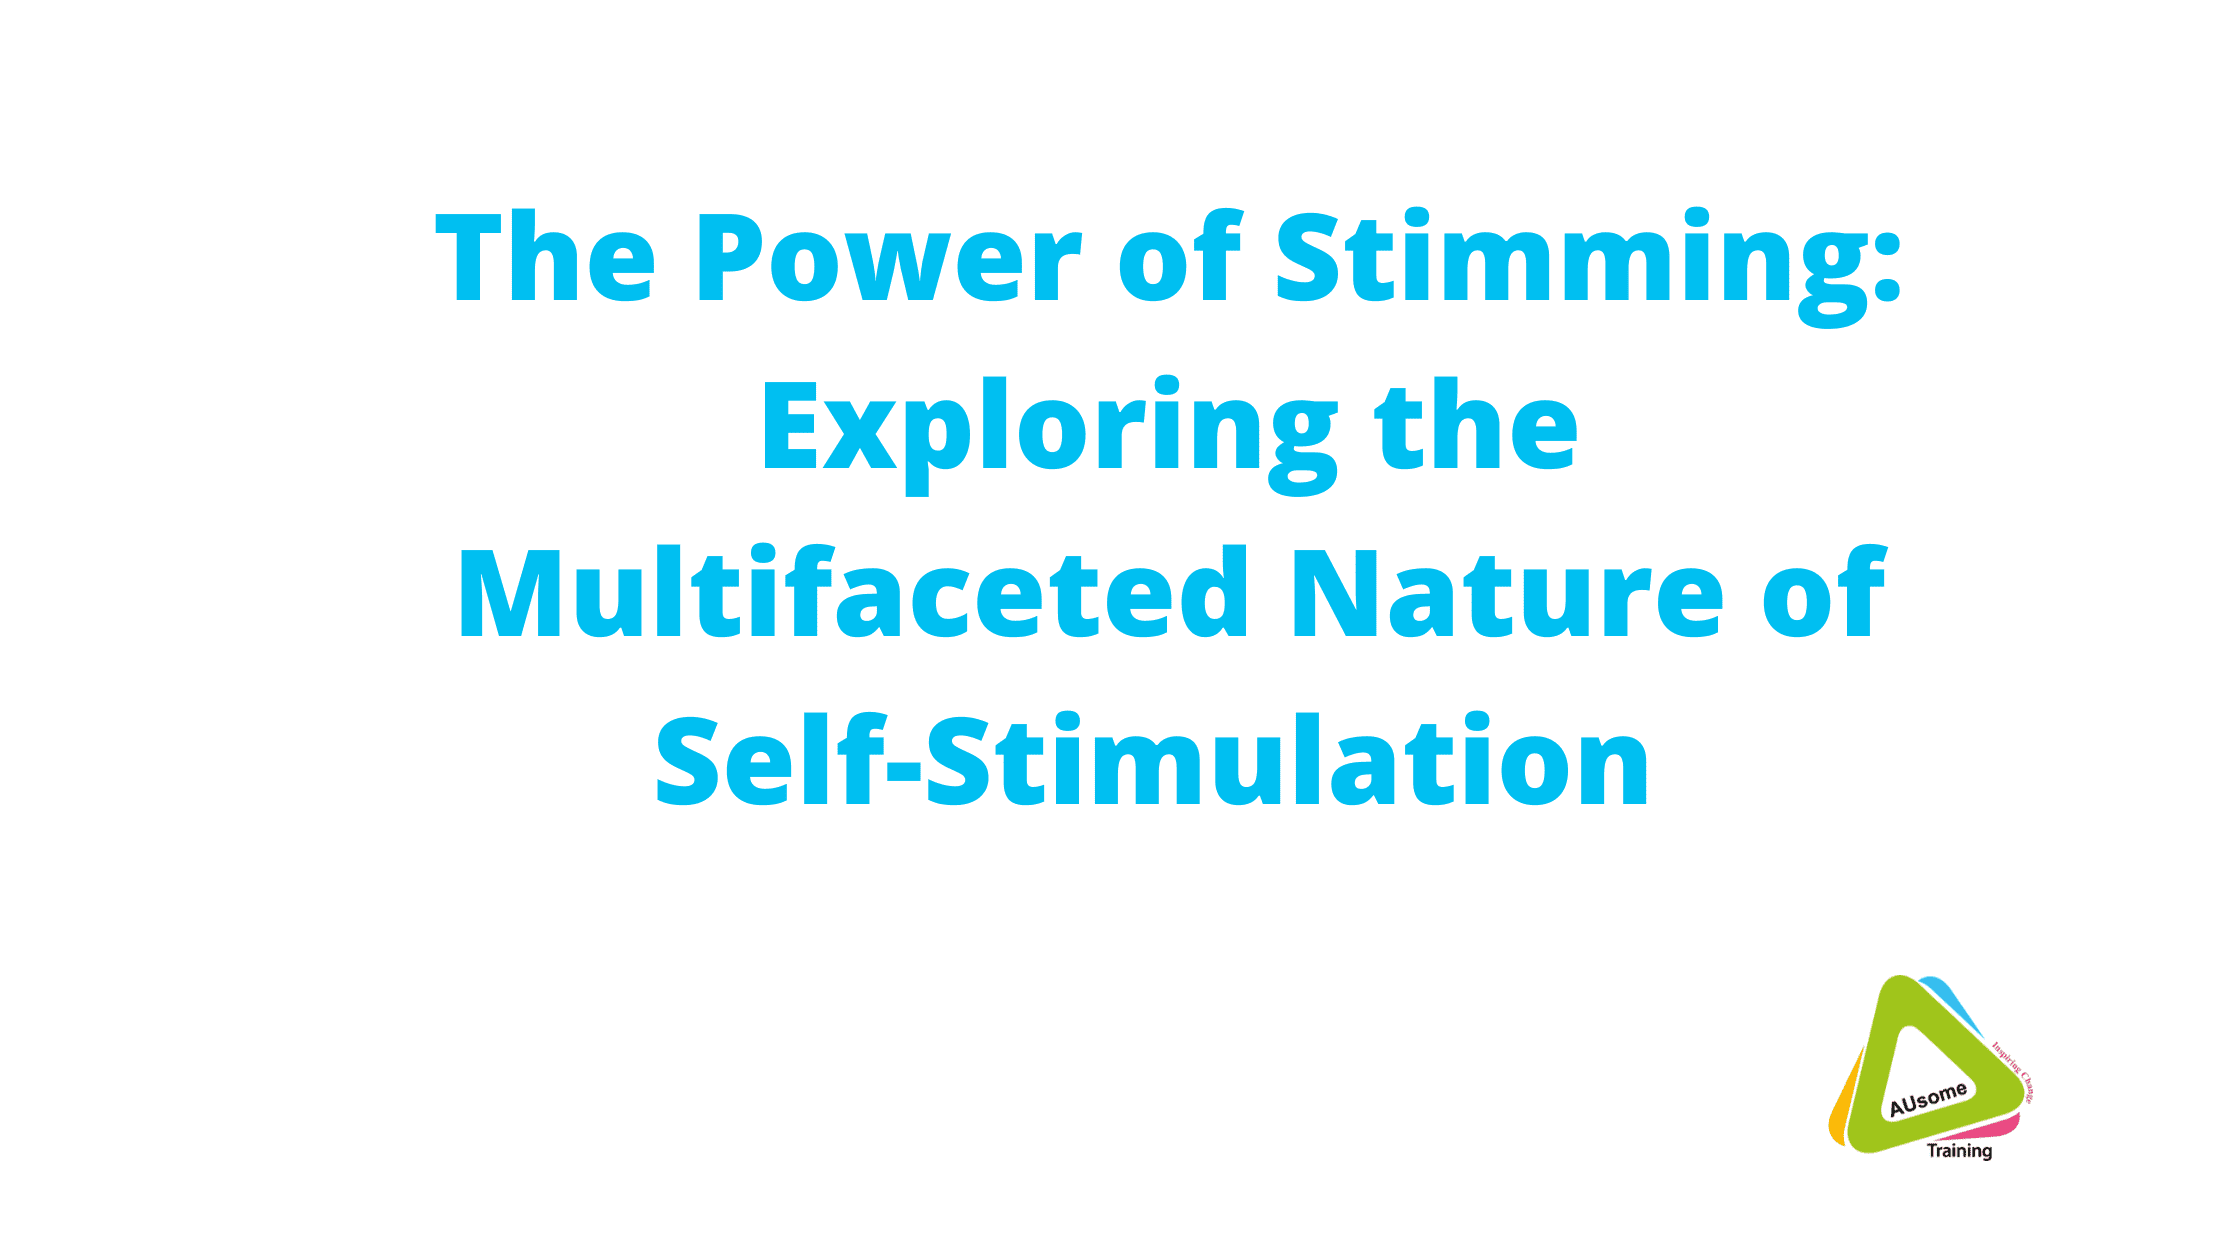 The Power of Stimming: Exploring the Multifaceted Nature of Self-Stimulation